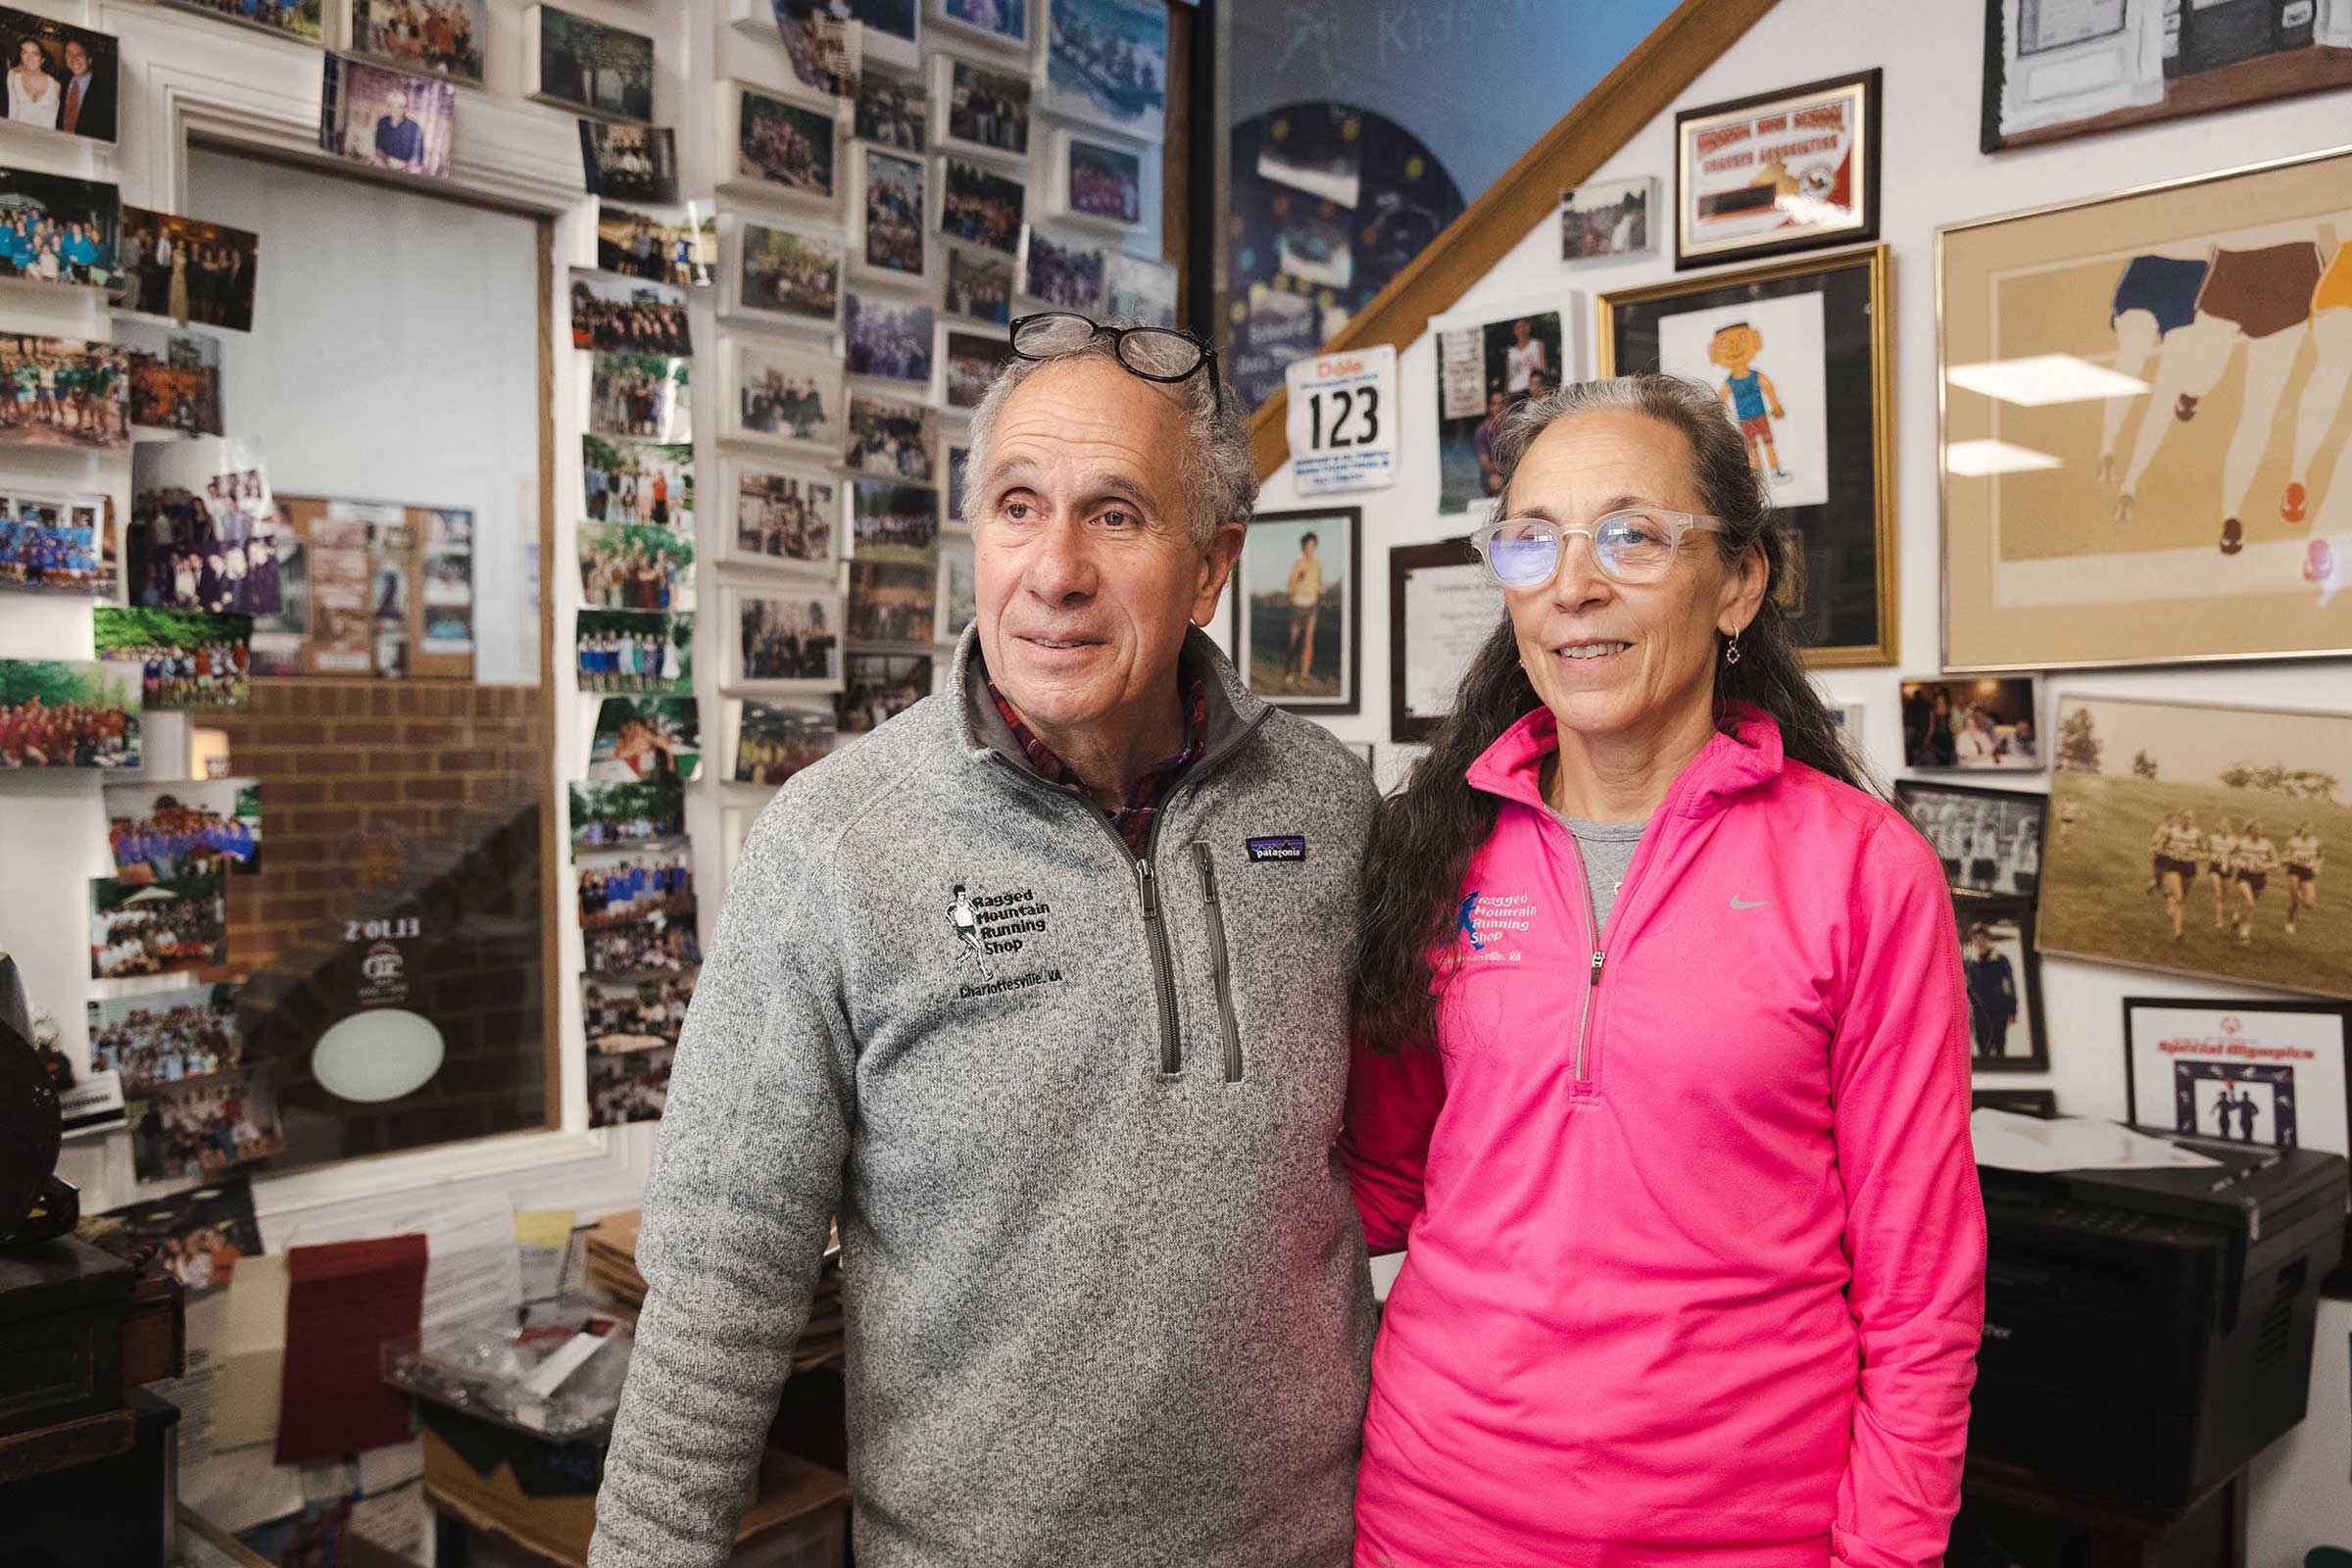 Mark and Cynthia Lorenzoni in an office, the walls of which are covered in photographs